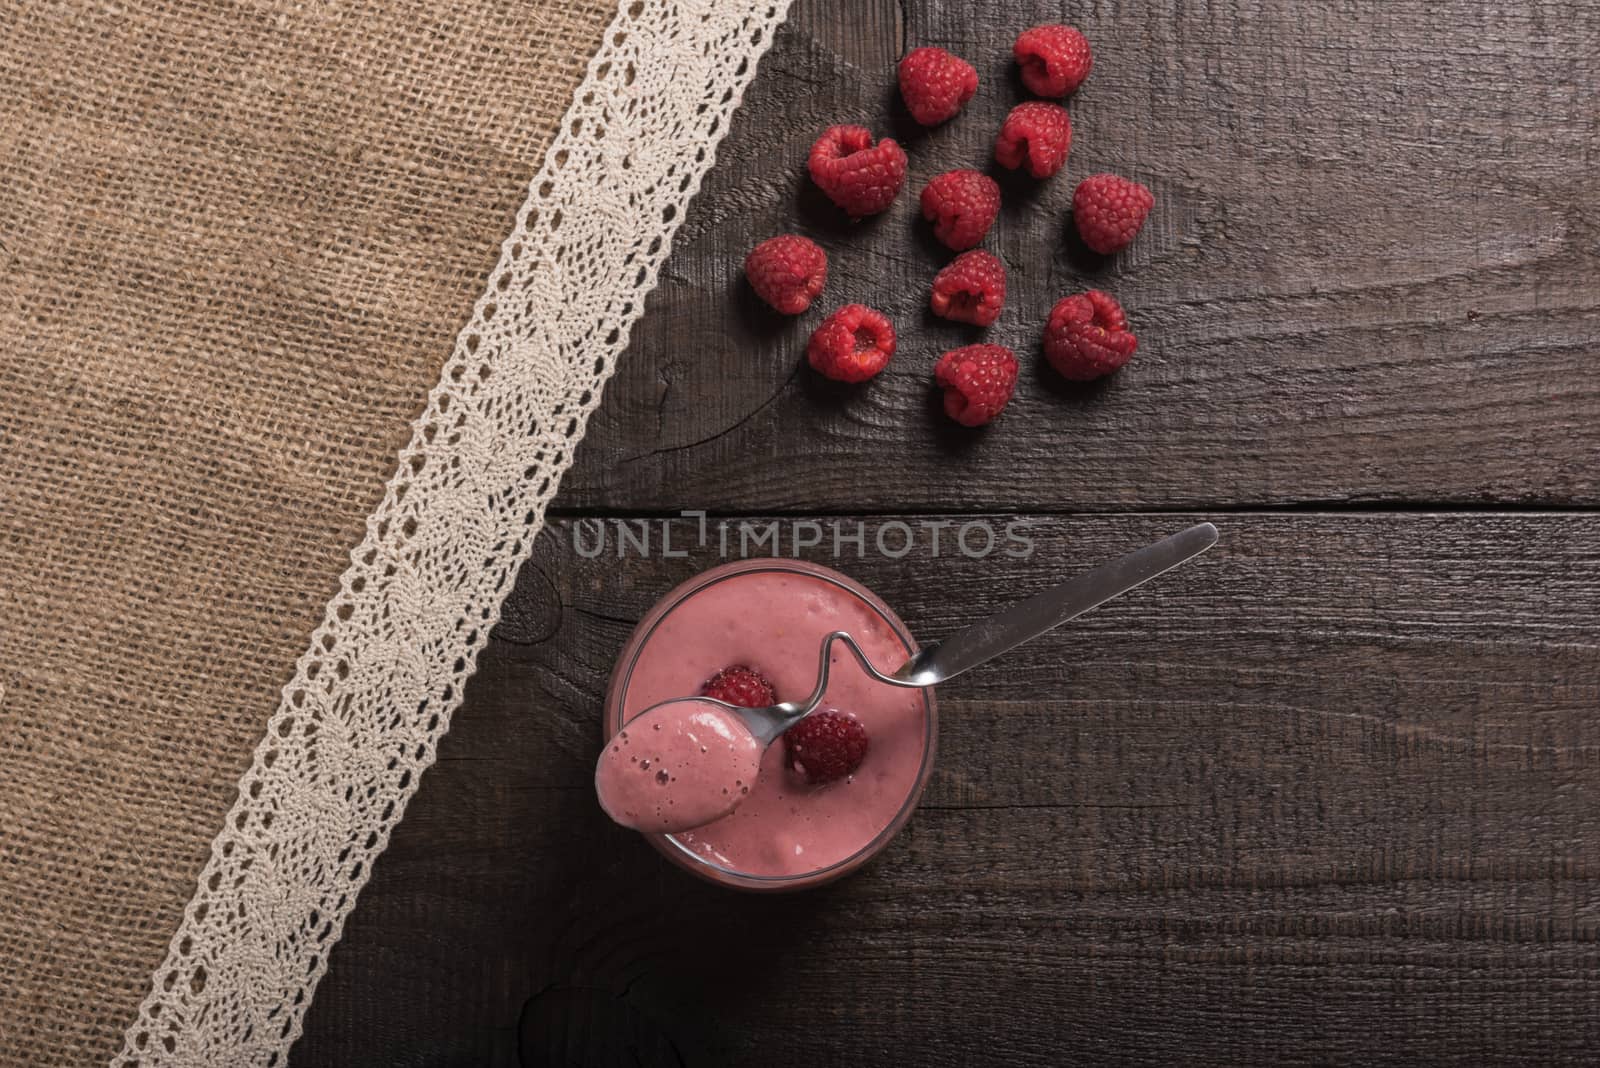 raspberry - banana smoothie by Andreua